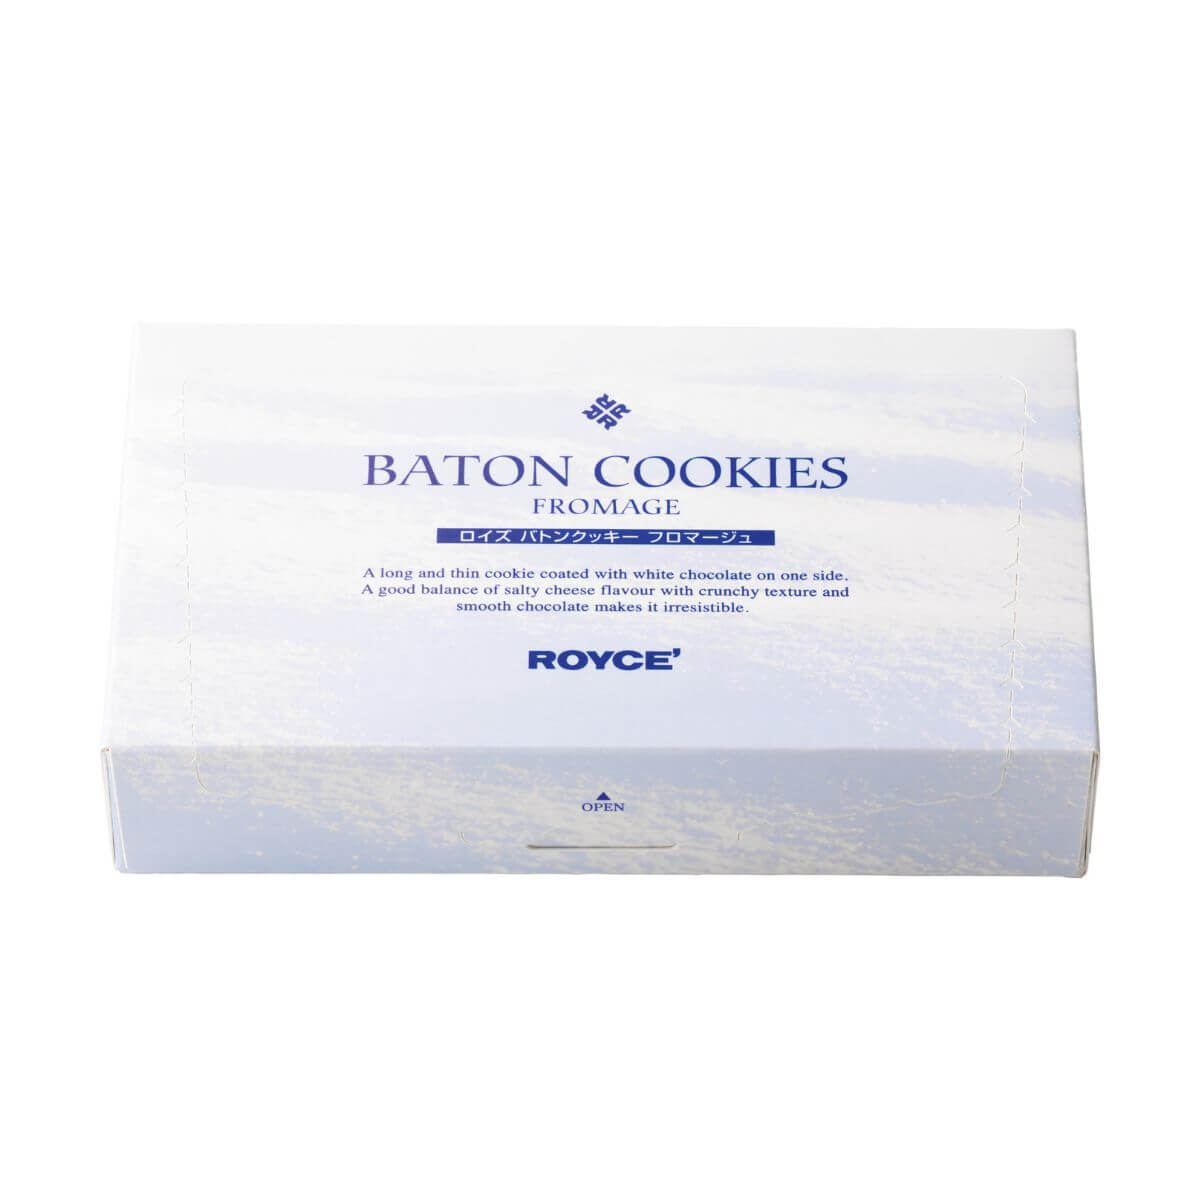 ROYCE' Chocolate - Baton Cookies "Fromage (25 Pcs)" - Image shows a light blue rectangular box. Text in middle center says Baton Cookies Fromage A long and thin cookie coated with white chocolate on one side. A good balance of salty cheese flavour with crunchy texture and smooth chocolate makes it irresistible. ROYCE'.